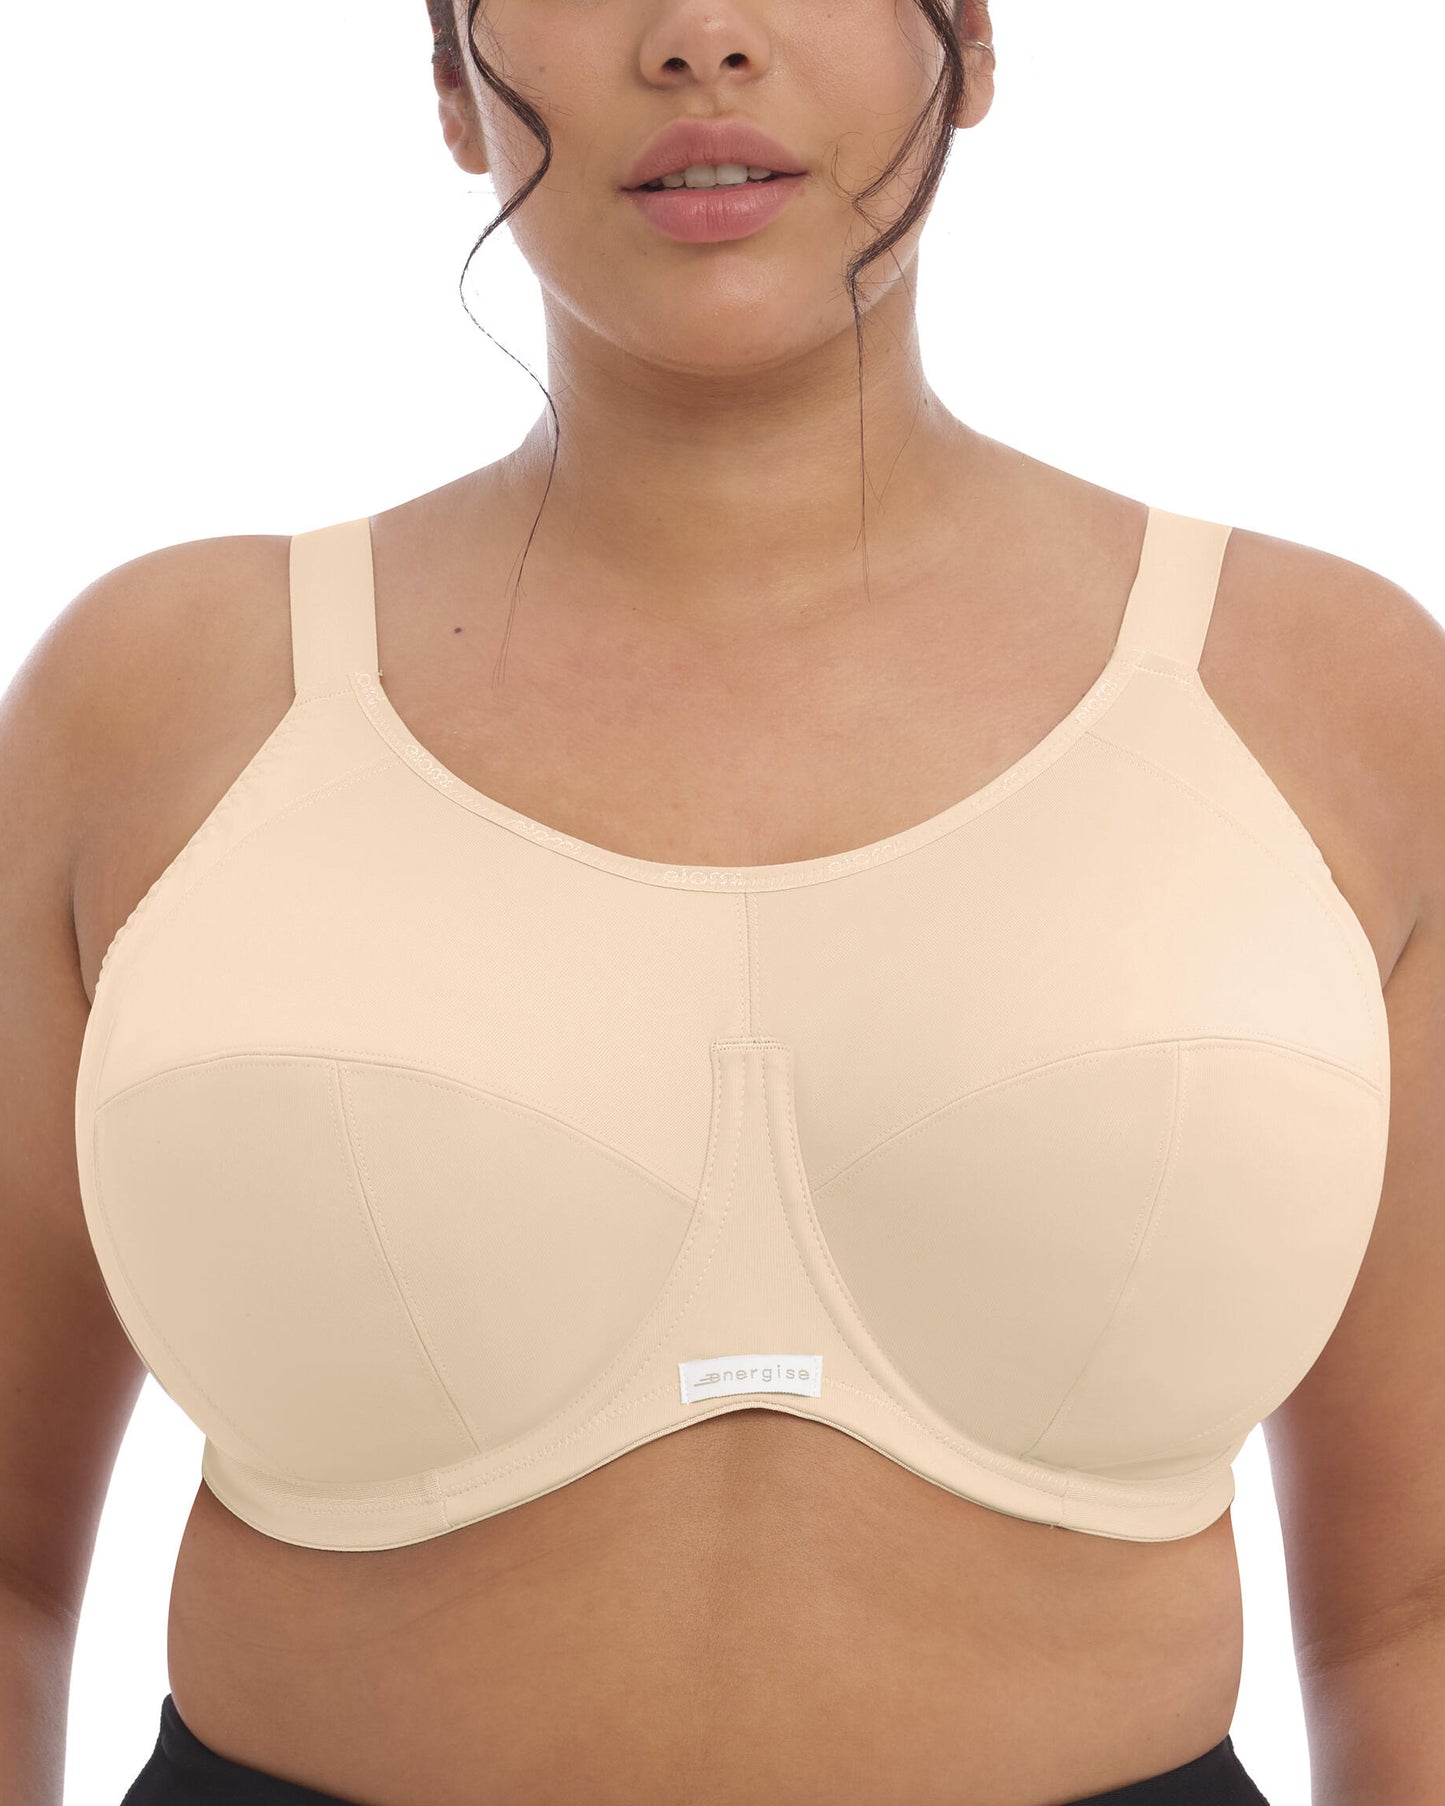 Elomi Energise Underwire Sports Bra (More colors available) - EL8041 - Nude